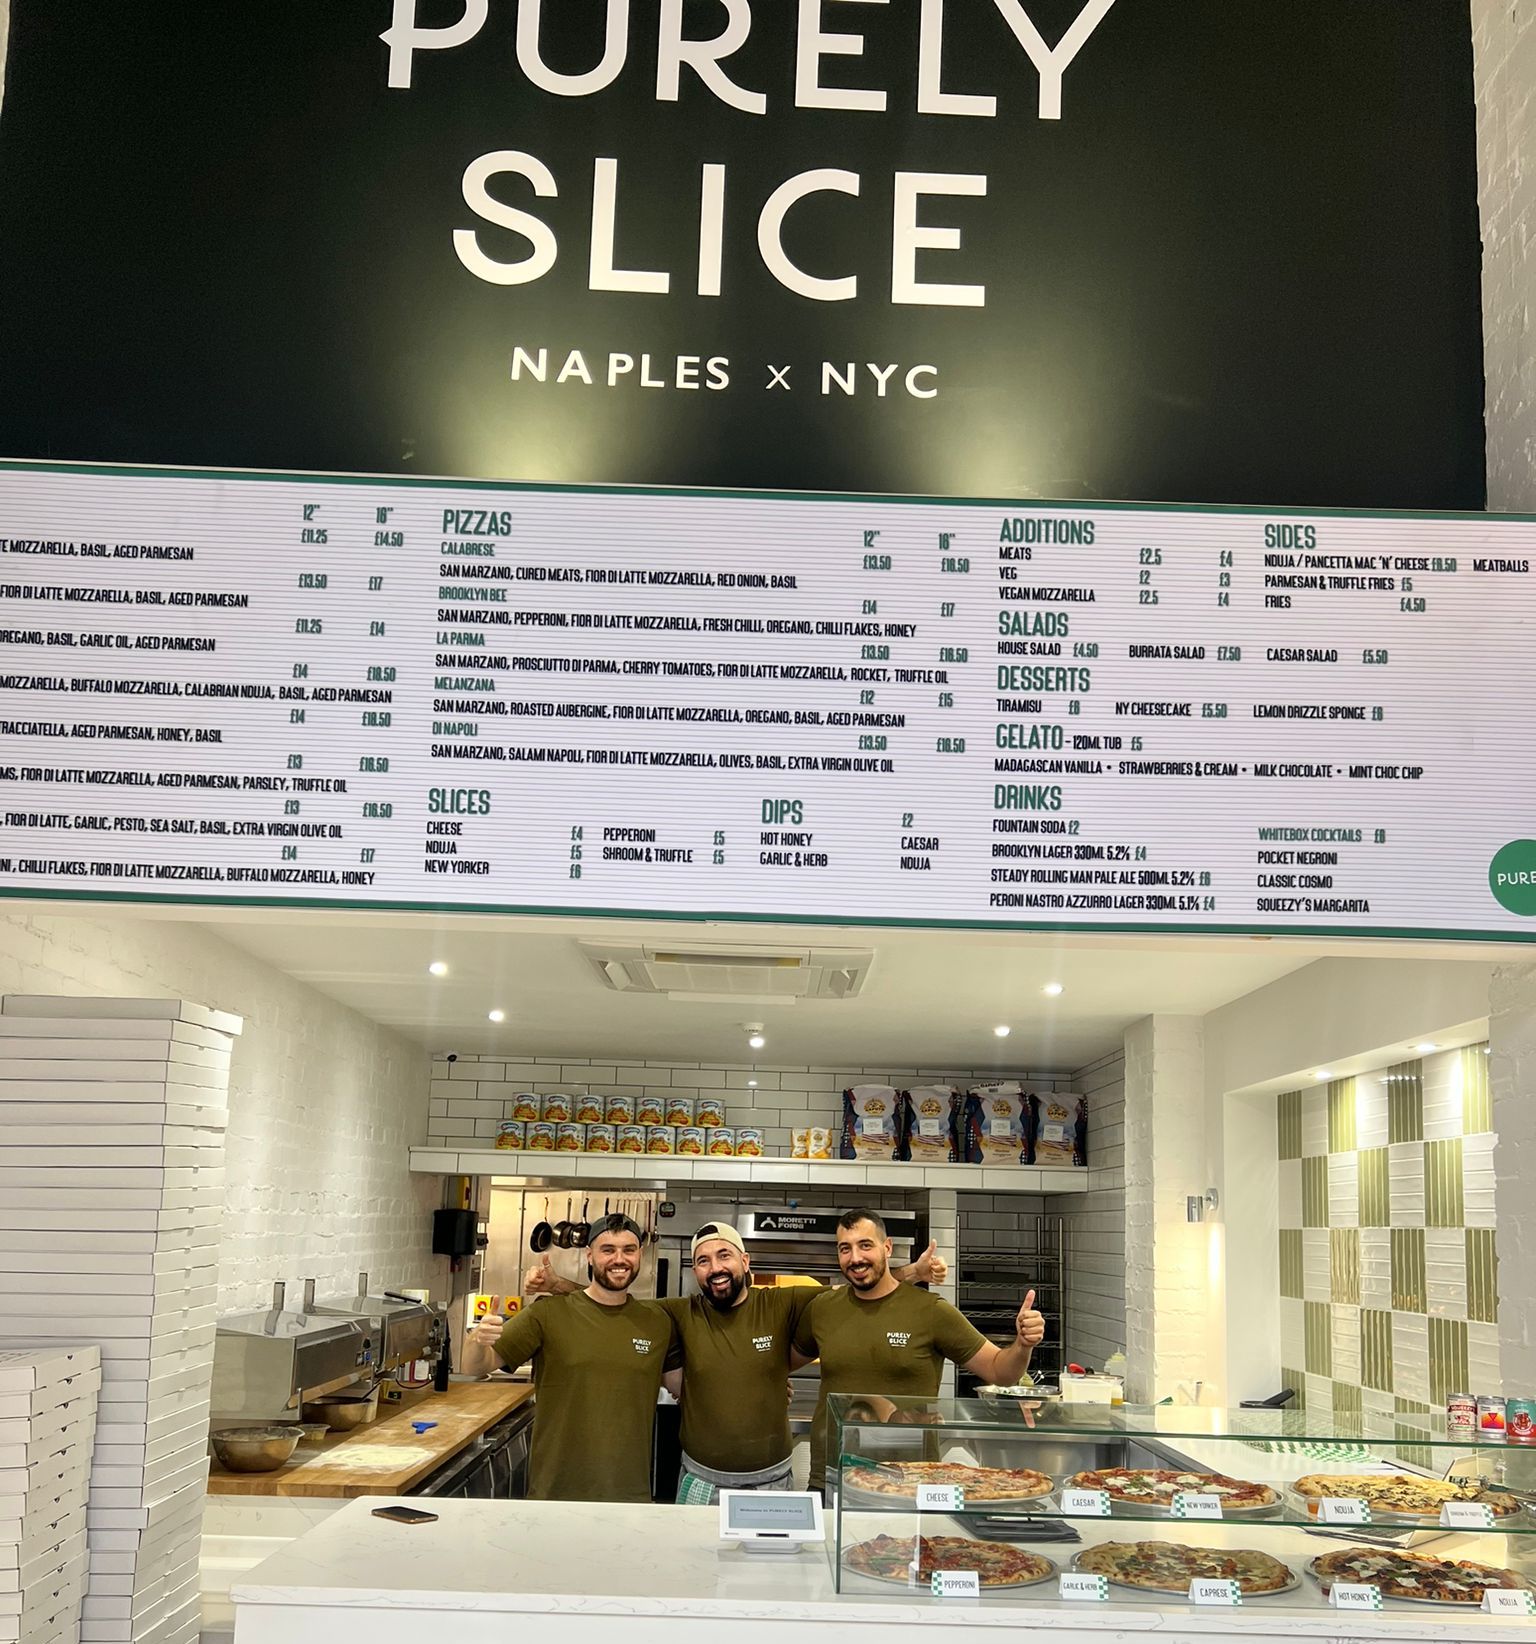 The Purely Slice pizza eatery in Birkdale in Southport